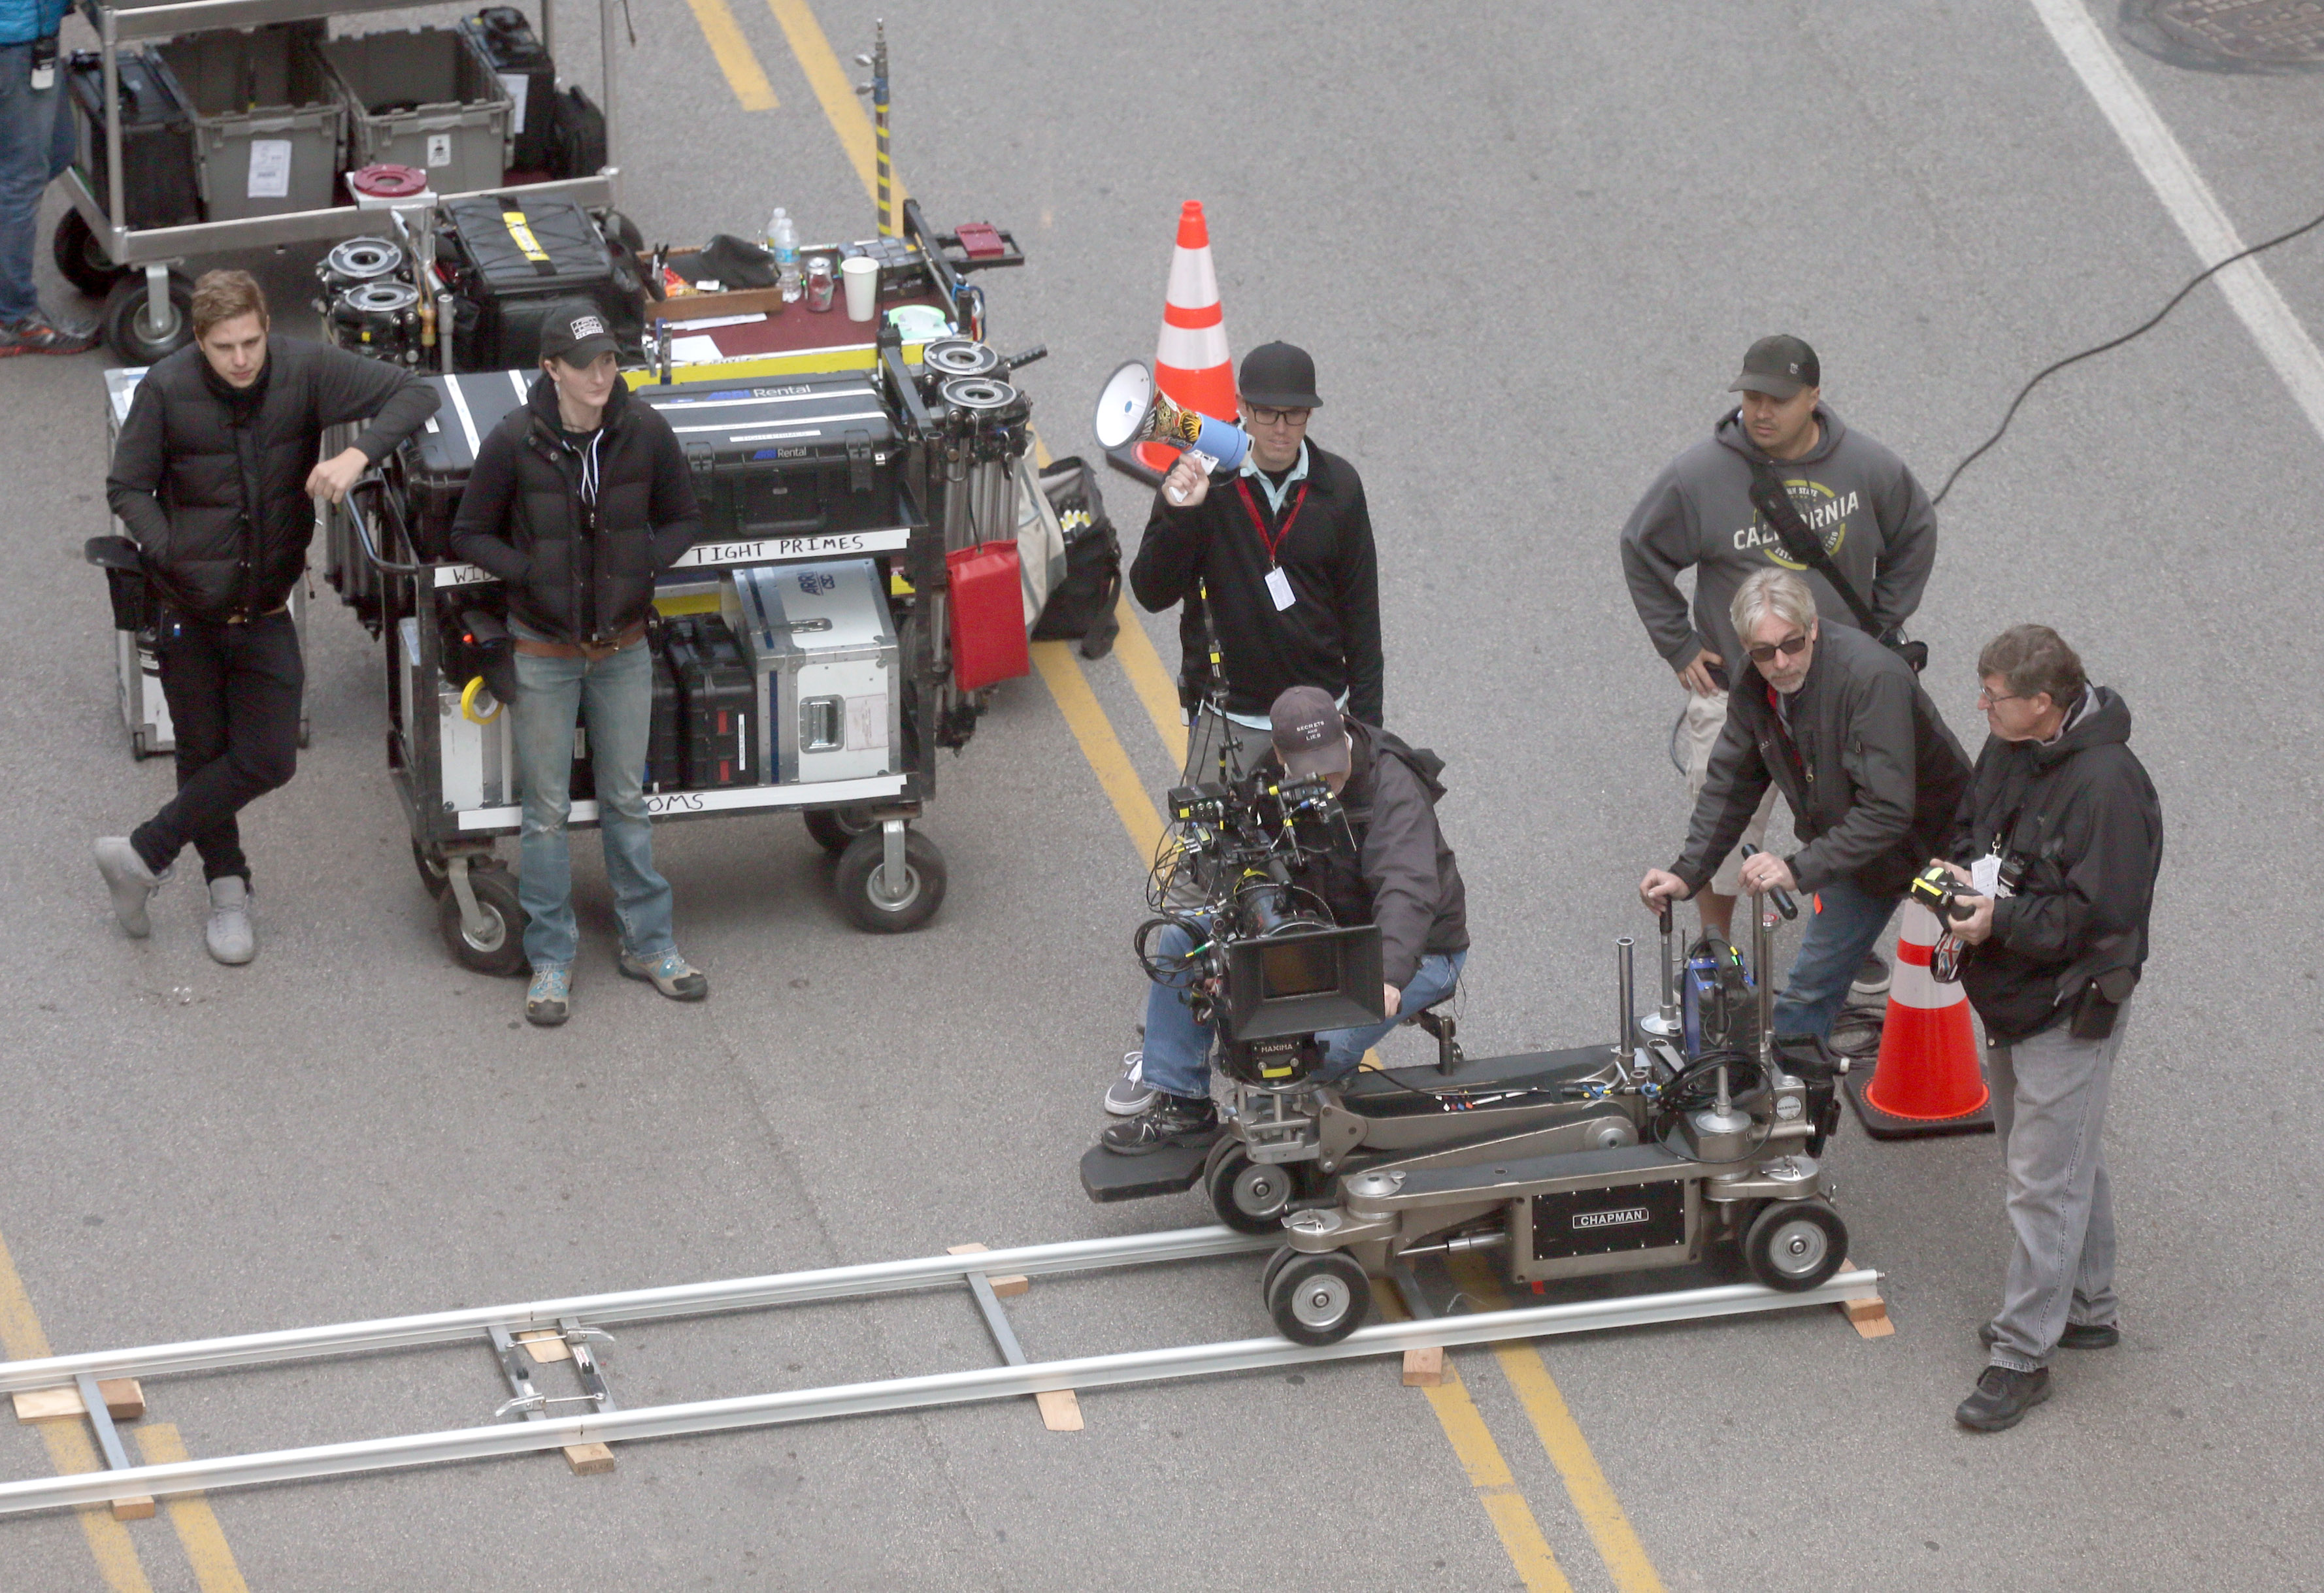 ‘Stickshift,’ an action movie for Hulu, filming in Northeast Ohio this